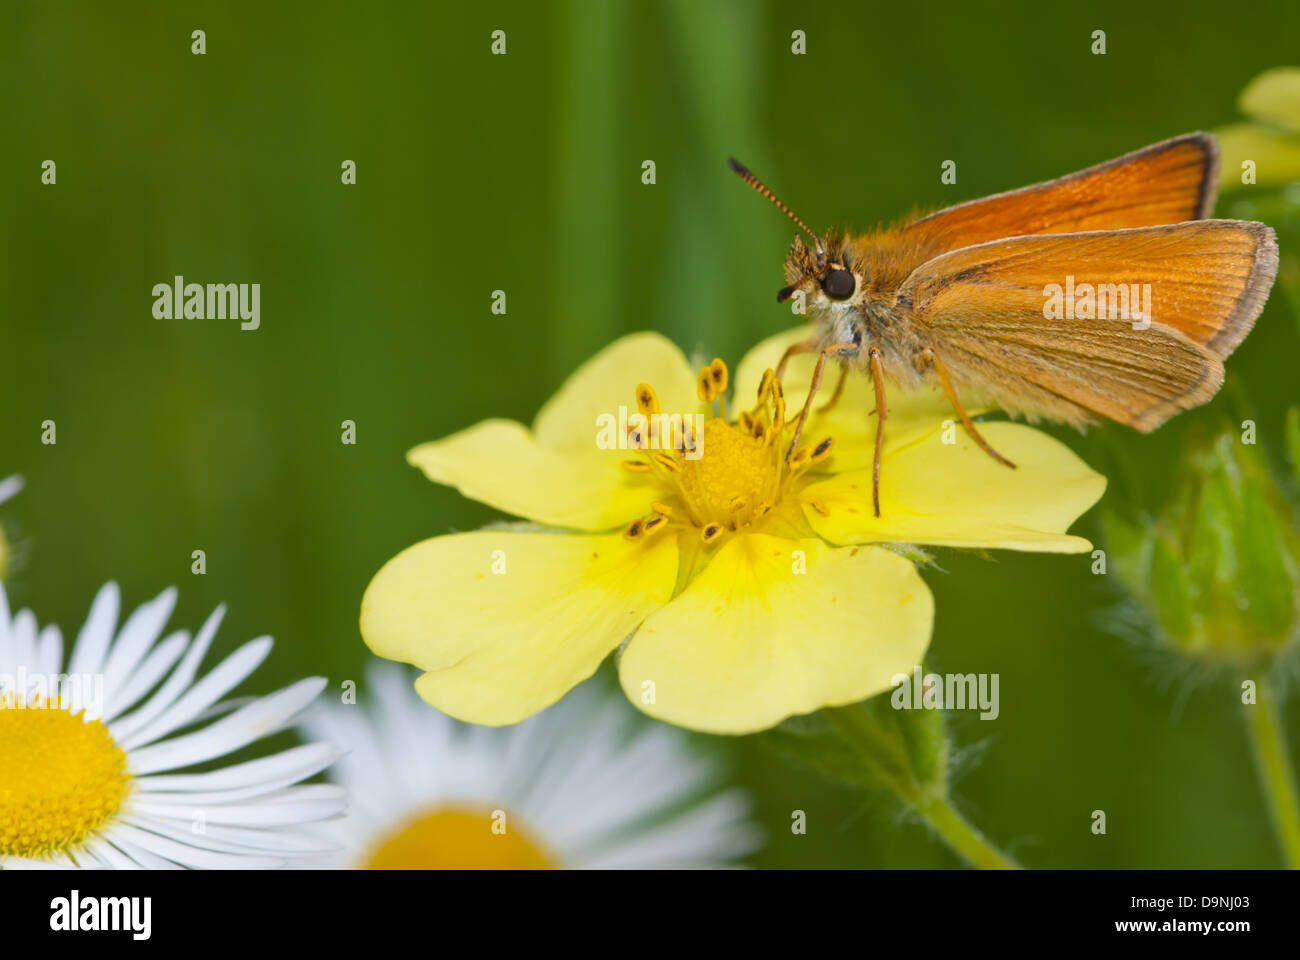 A European skipper (Thymelicus lineola) perched on a cinquefoil blossom (Potentilla spp) in a meadow with daisies Stock Photo